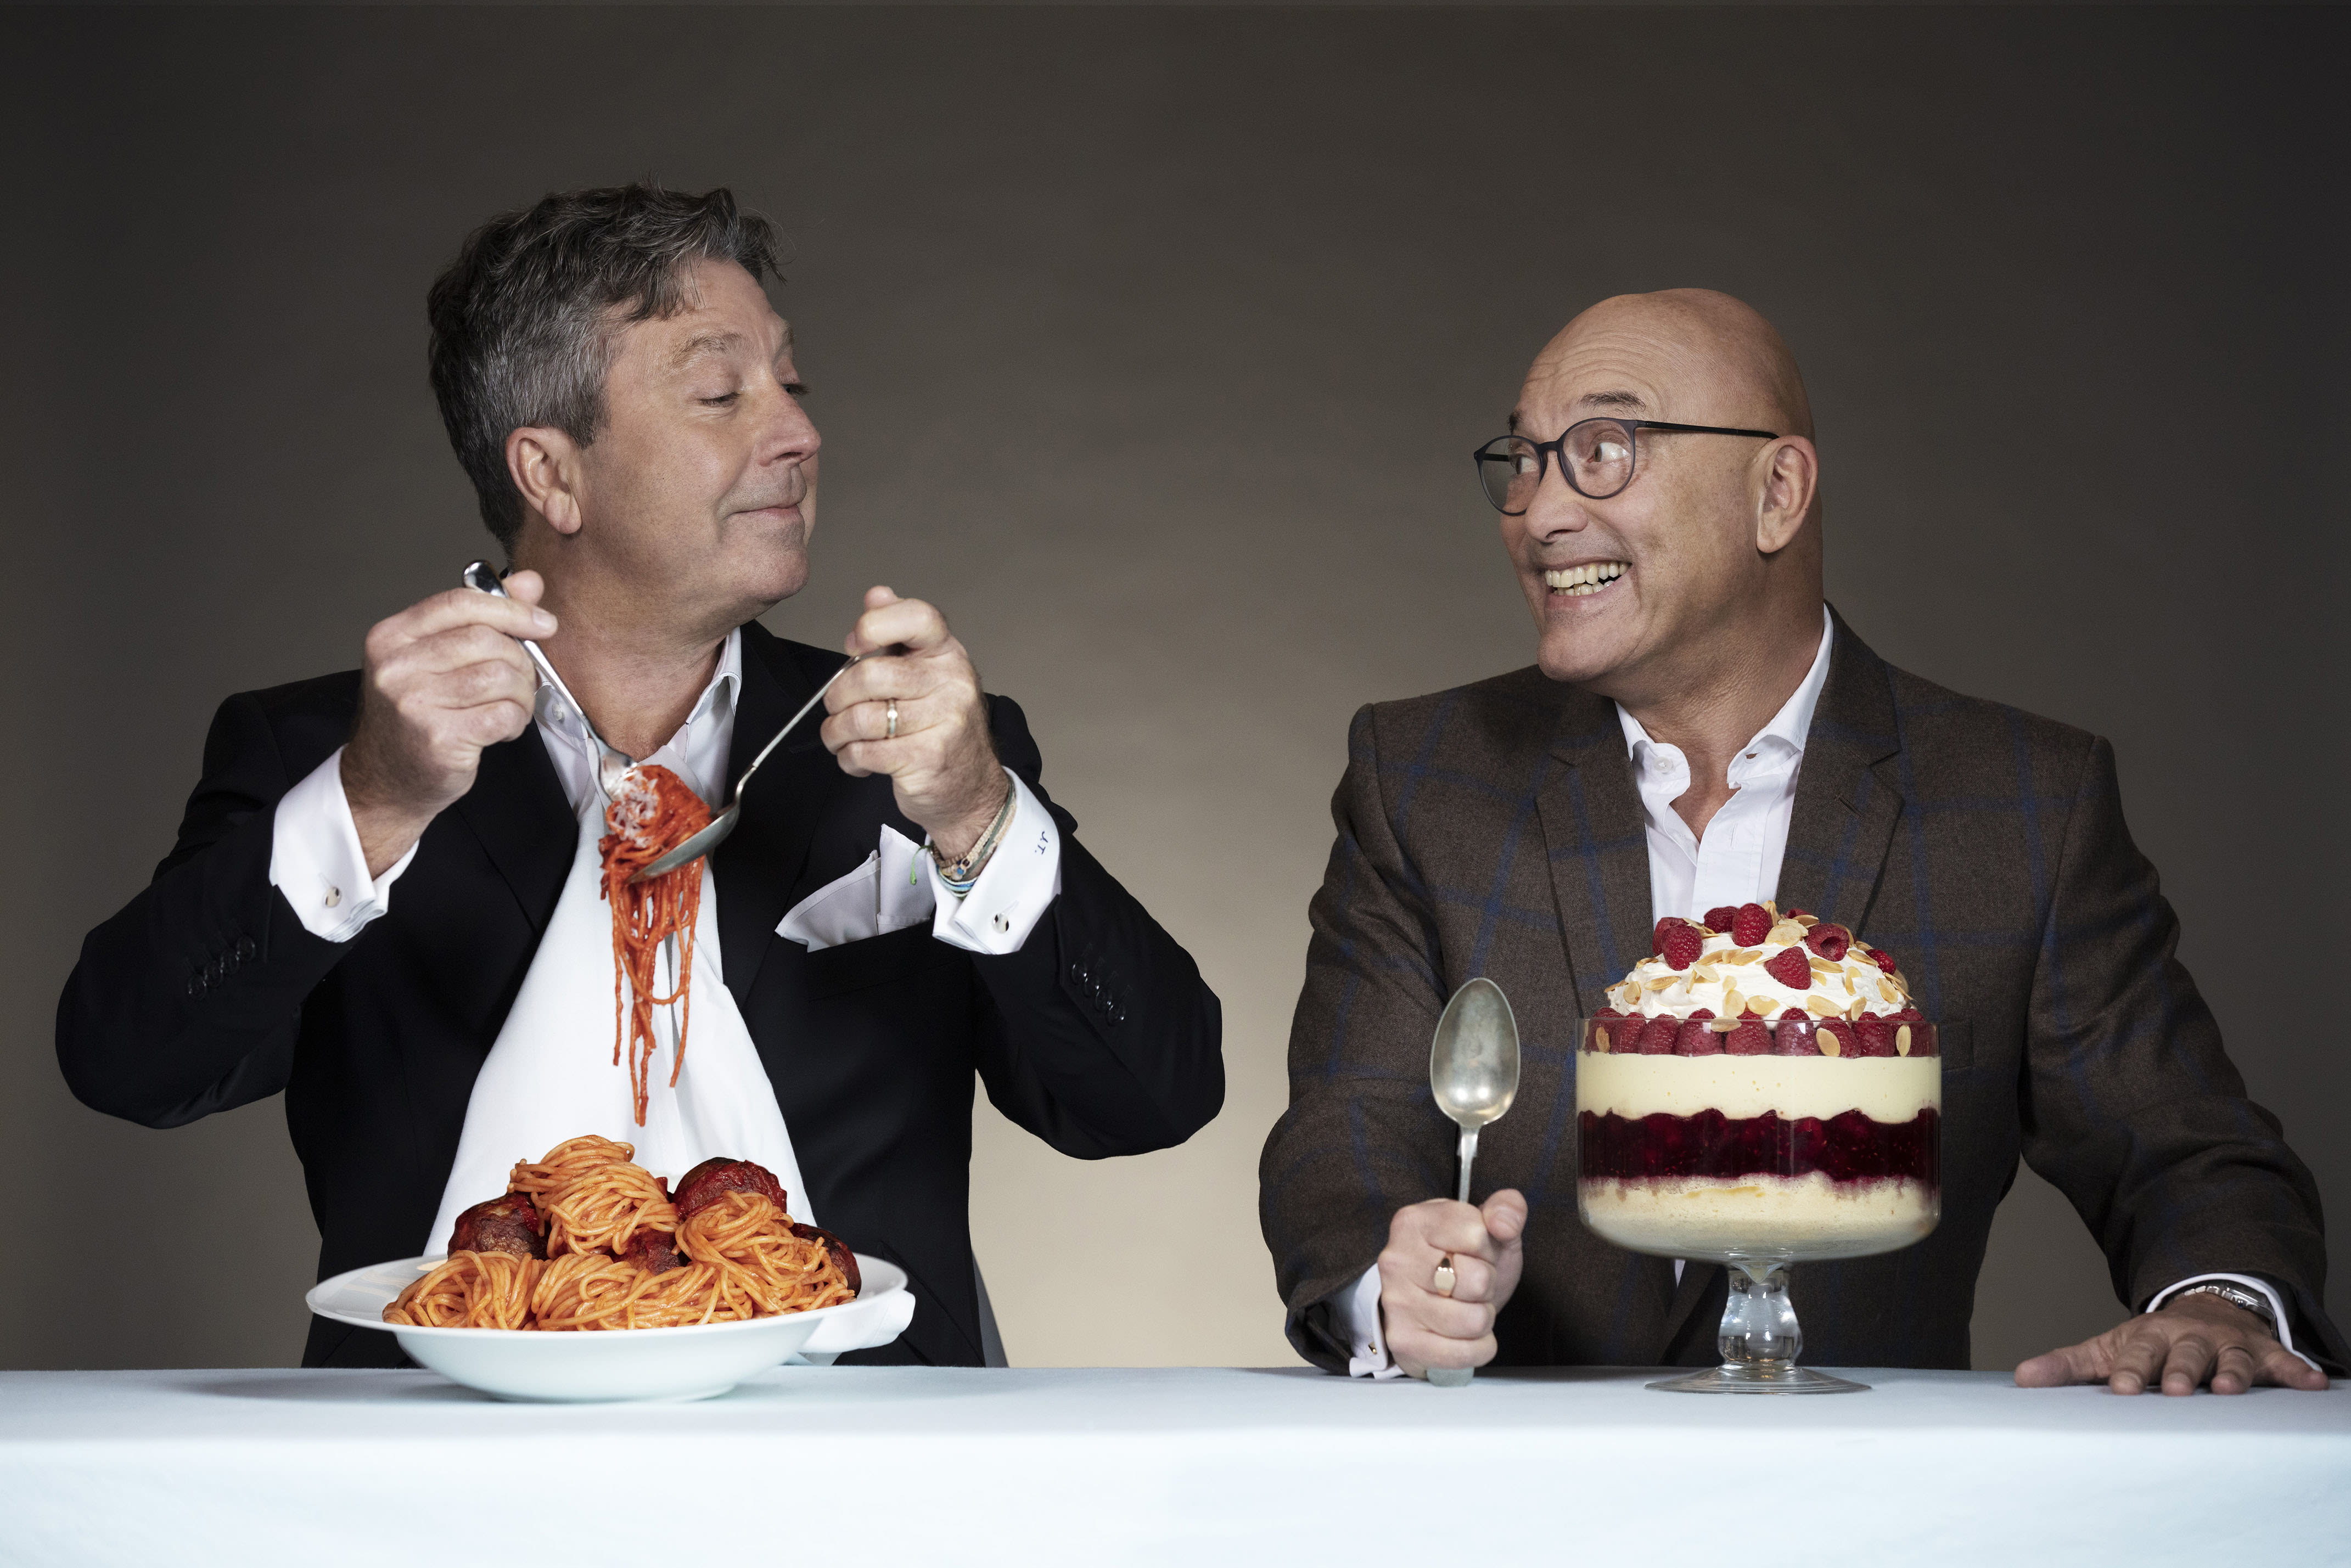 '20 years on, MasterChef remains a winning recipe thanks to its hosts'